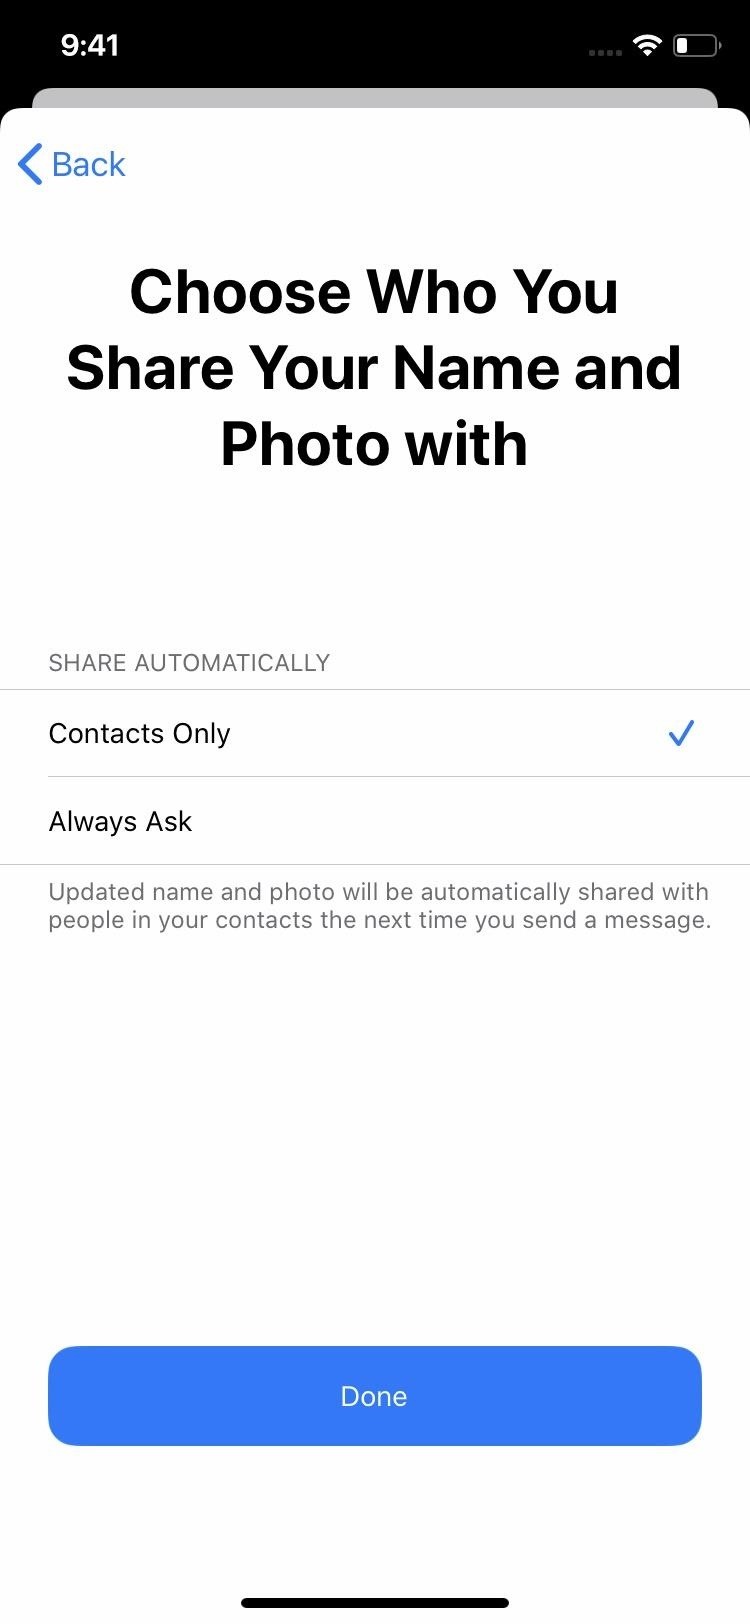 How to Change Your Profile Picture & Display Name for iMessage in iOS 13